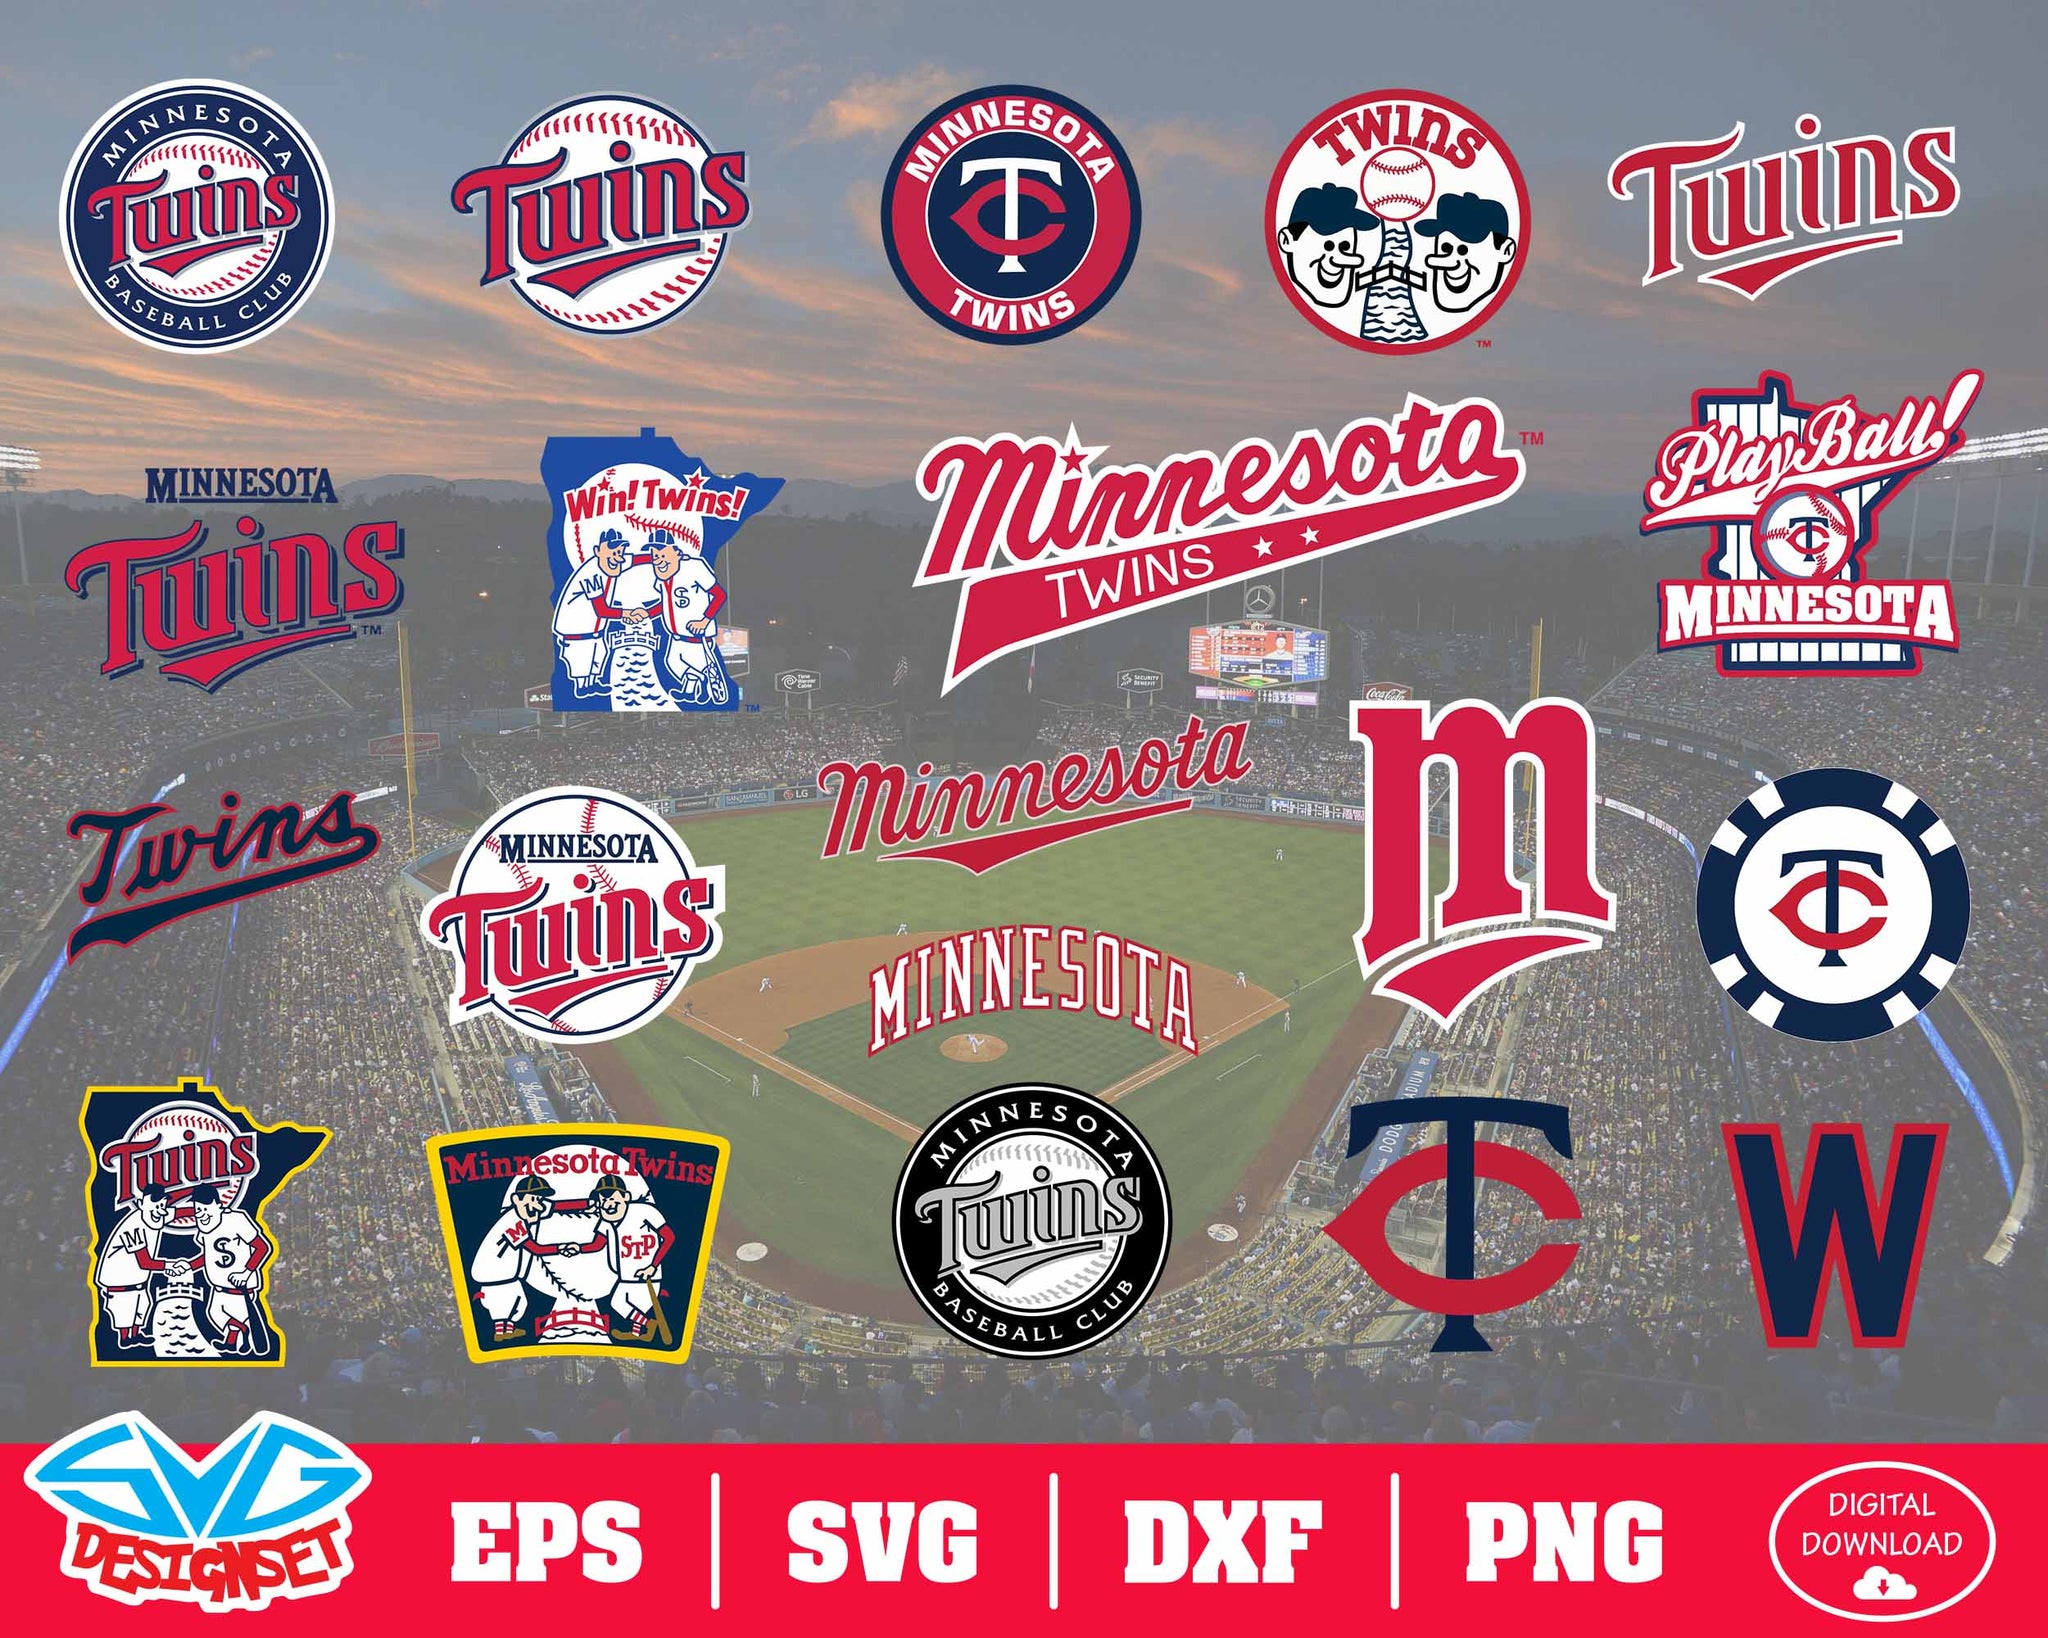 Minnesota Twins Team Svg, Dxf, Eps, Png, Clipart, Silhouette and Cutfiles - SVGDesignSets